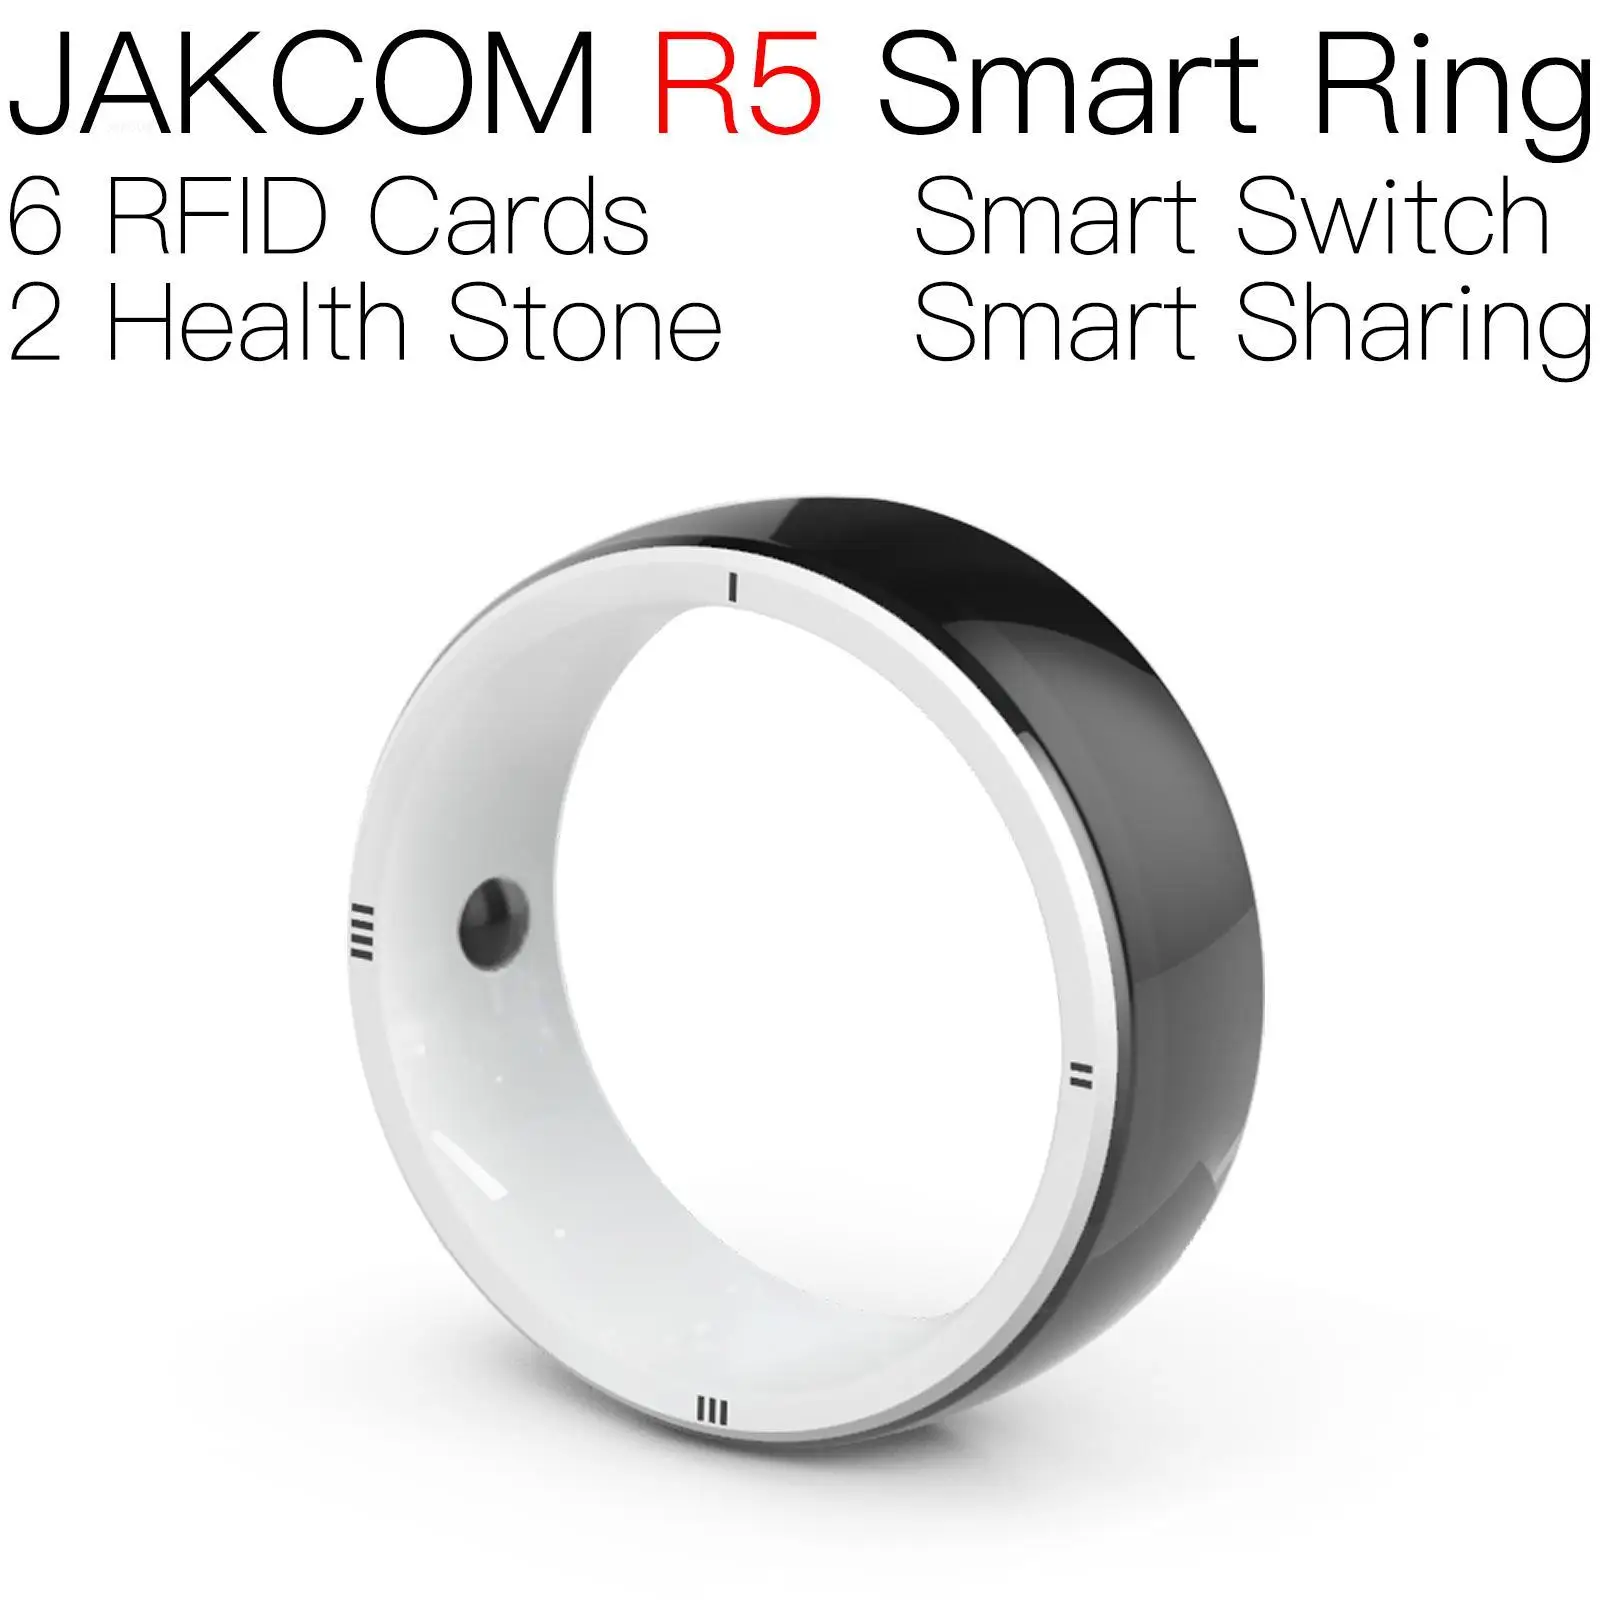 

JAKCOM R5 Smart Ring better than rfid tag uhf watch men nfc optocoupler ic ticket bus check patrol sublimation card ear